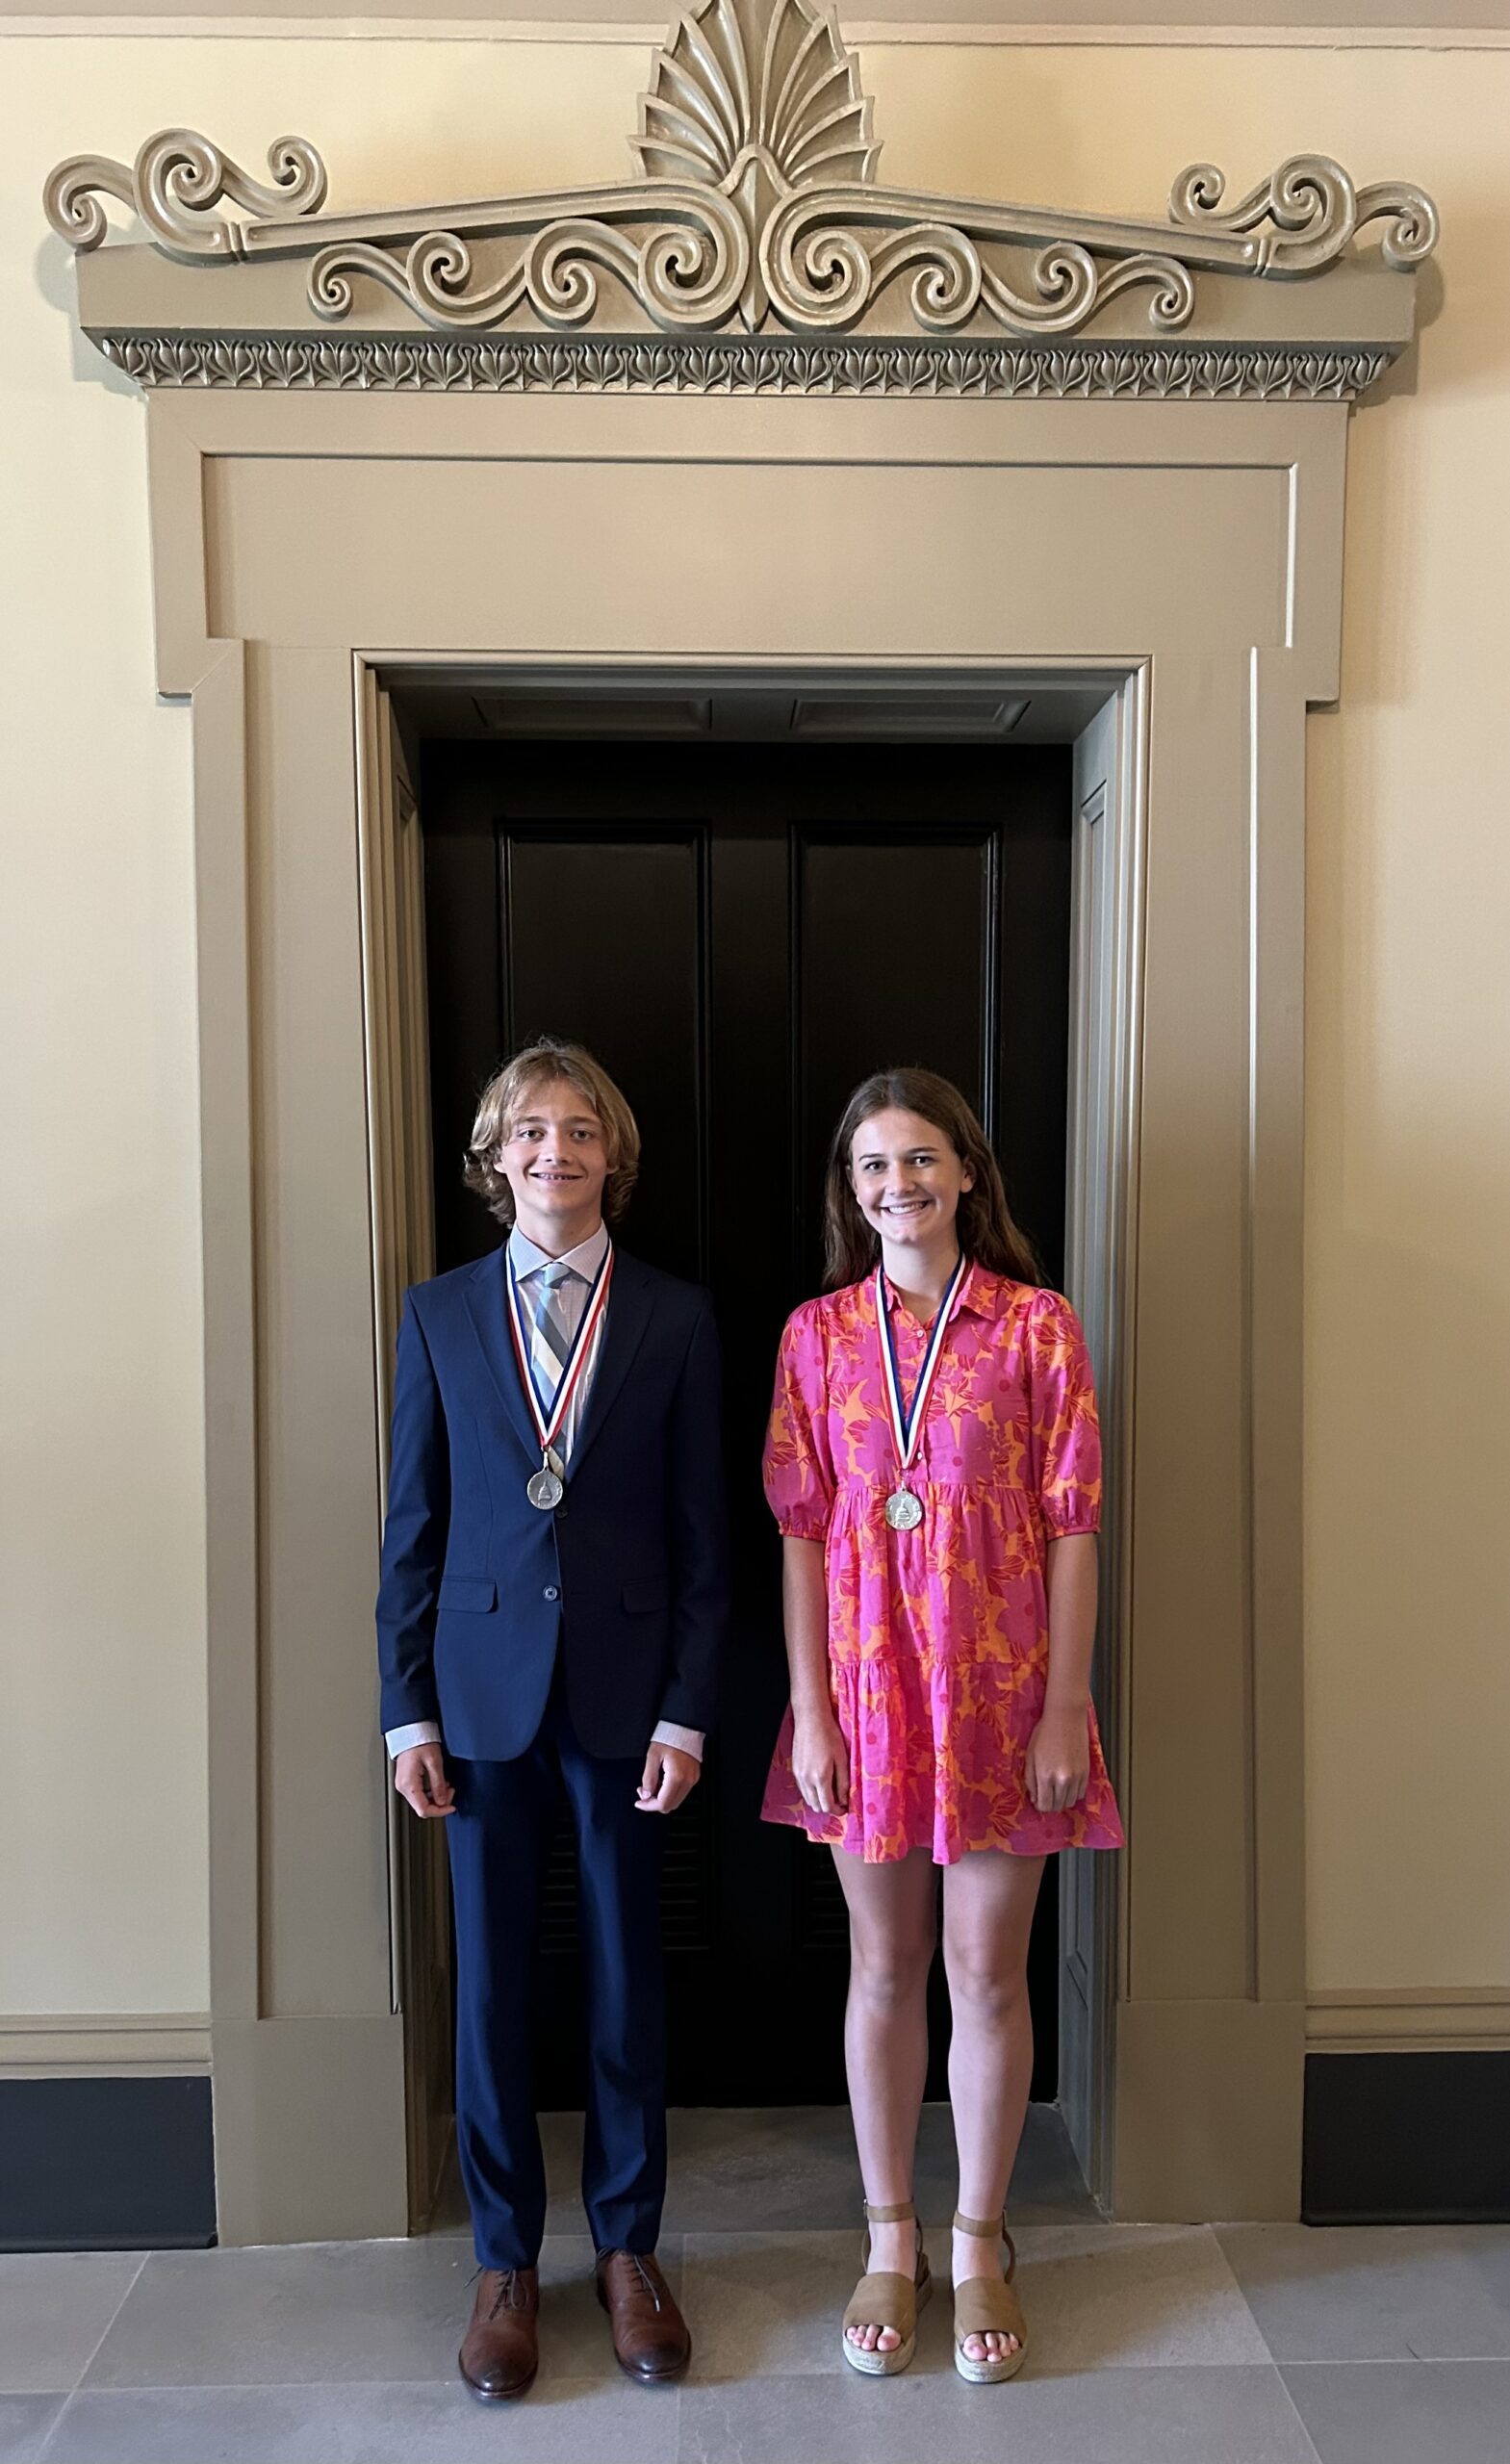 Charlie Mac Rowan (Bronze Award) & Lilly Shannon (Silver Award) were honored during the Congressional Award Mississippi Ceremony on Sunday, August 6 at the Old Capitol Museum in Jackson, MS.